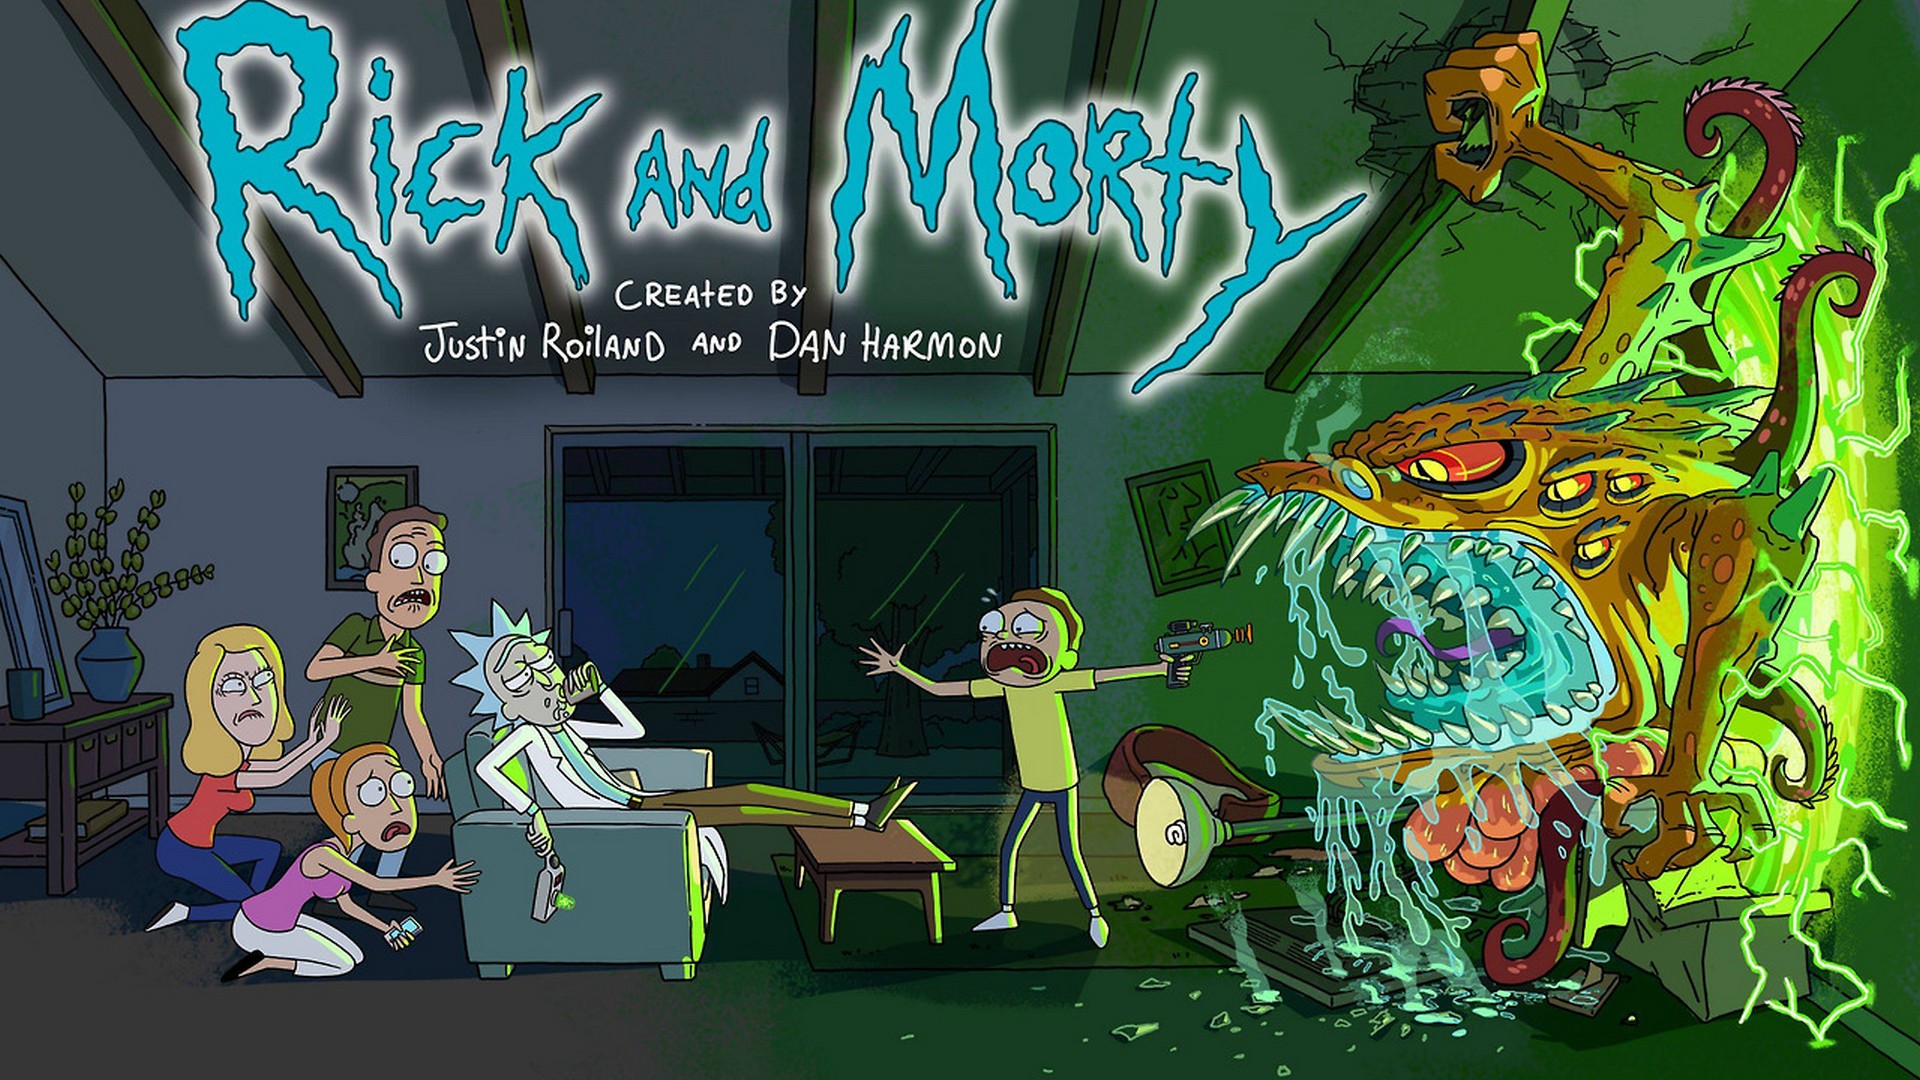 Rick and Morty Art Desktop Wallpaper with image resolution 1920x1080 pixel. You can use this wallpaper as background for your desktop Computer Screensavers, Android or iPhone smartphones